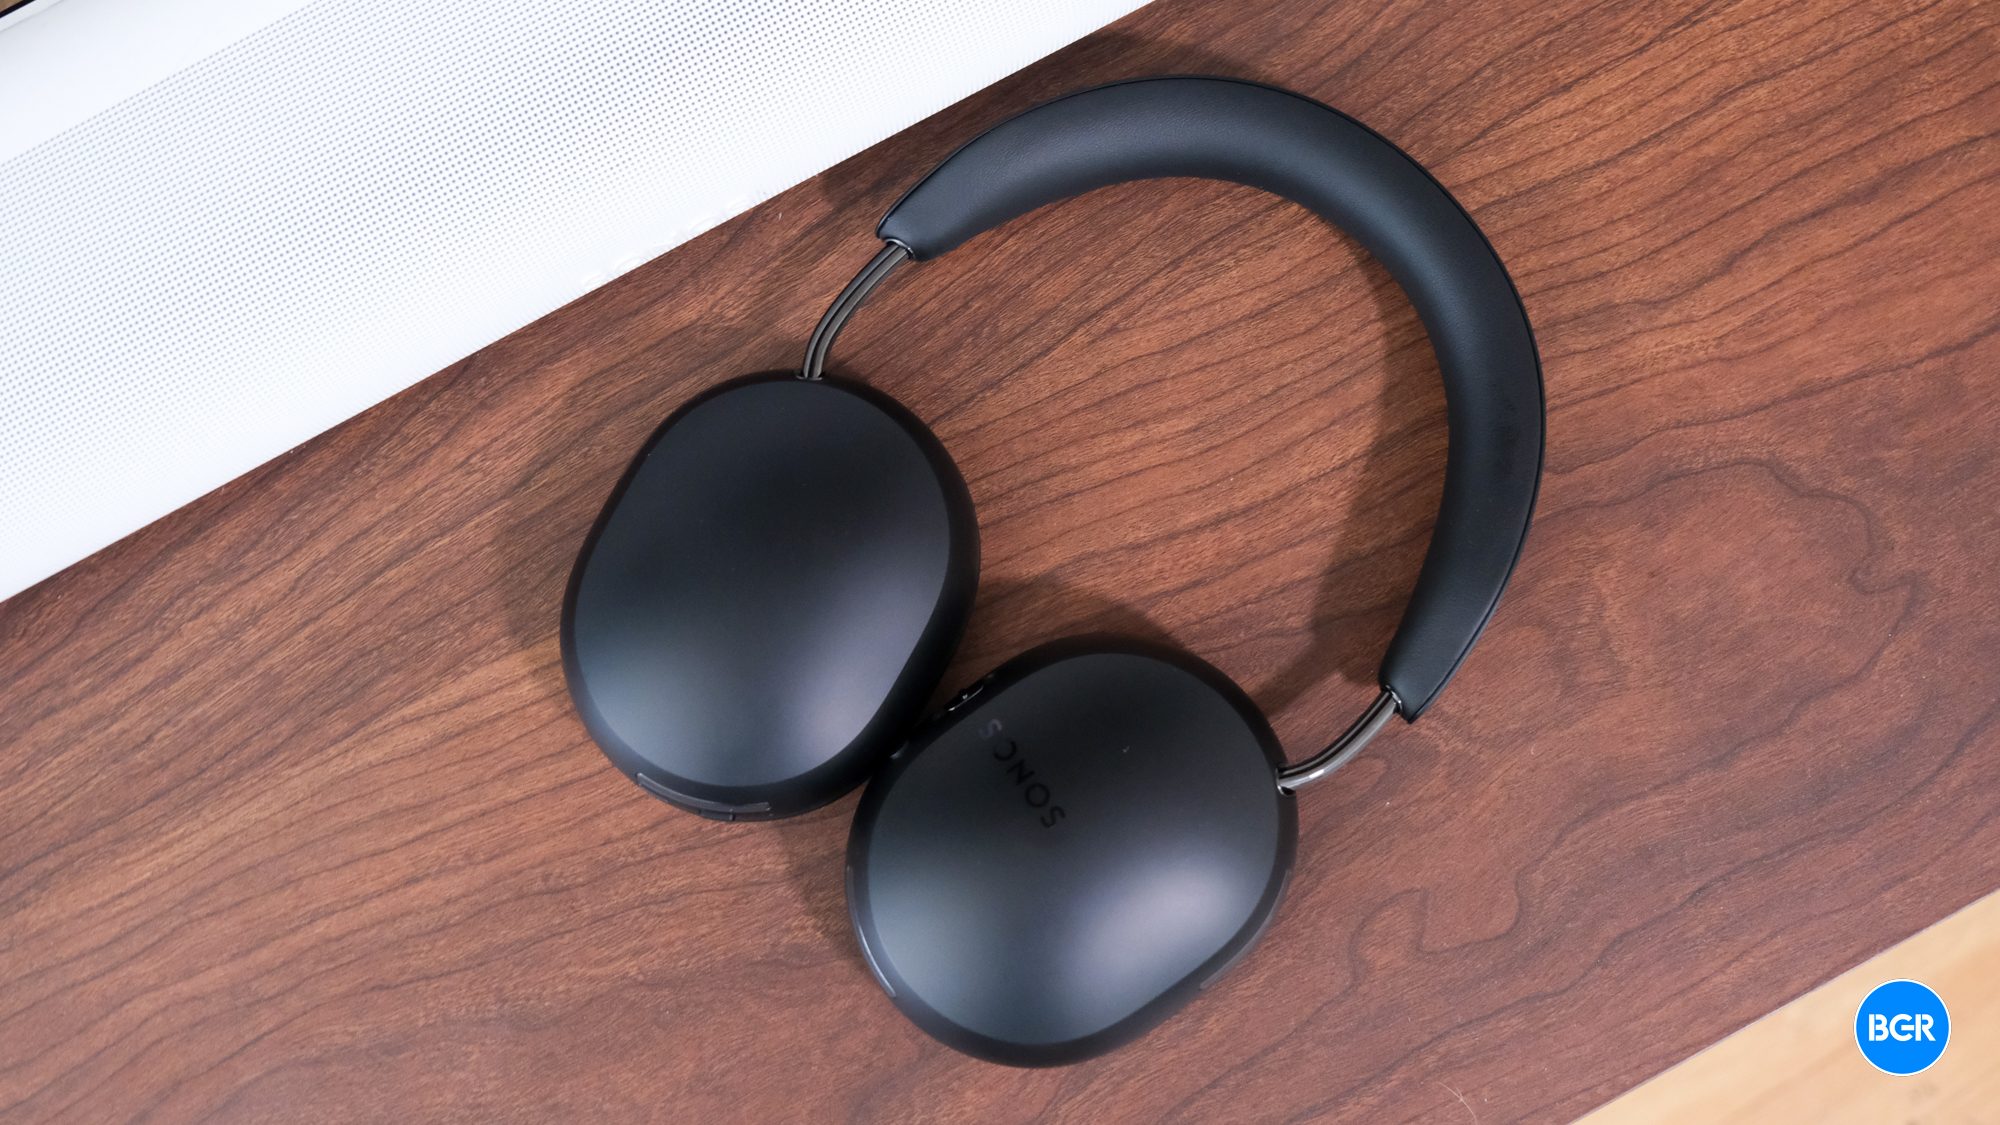 A top down view of the Sonos Ace headphones